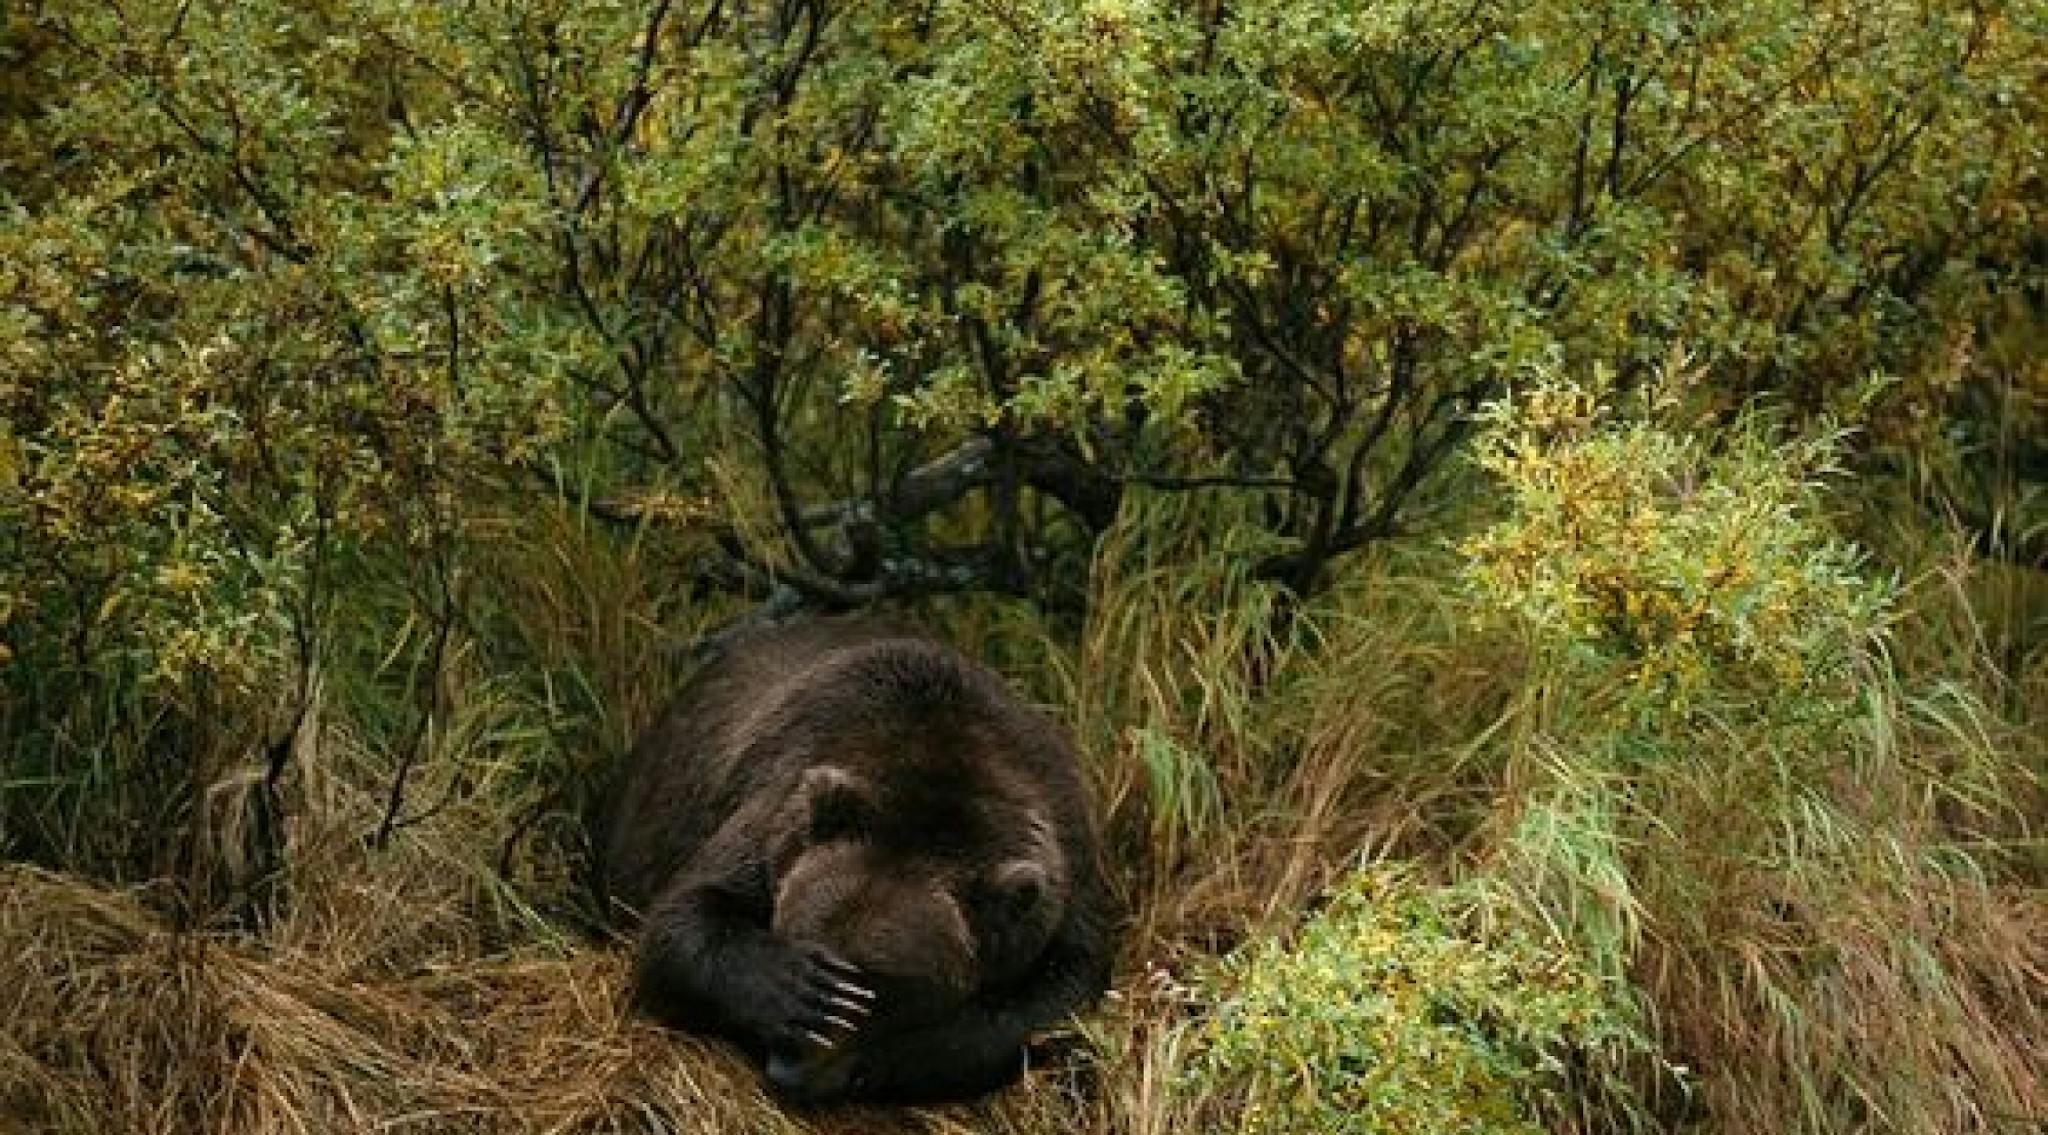 an image showing a sleeping bear in the woods and grass, he has a paw covering his head. its a vintage national geographic image.